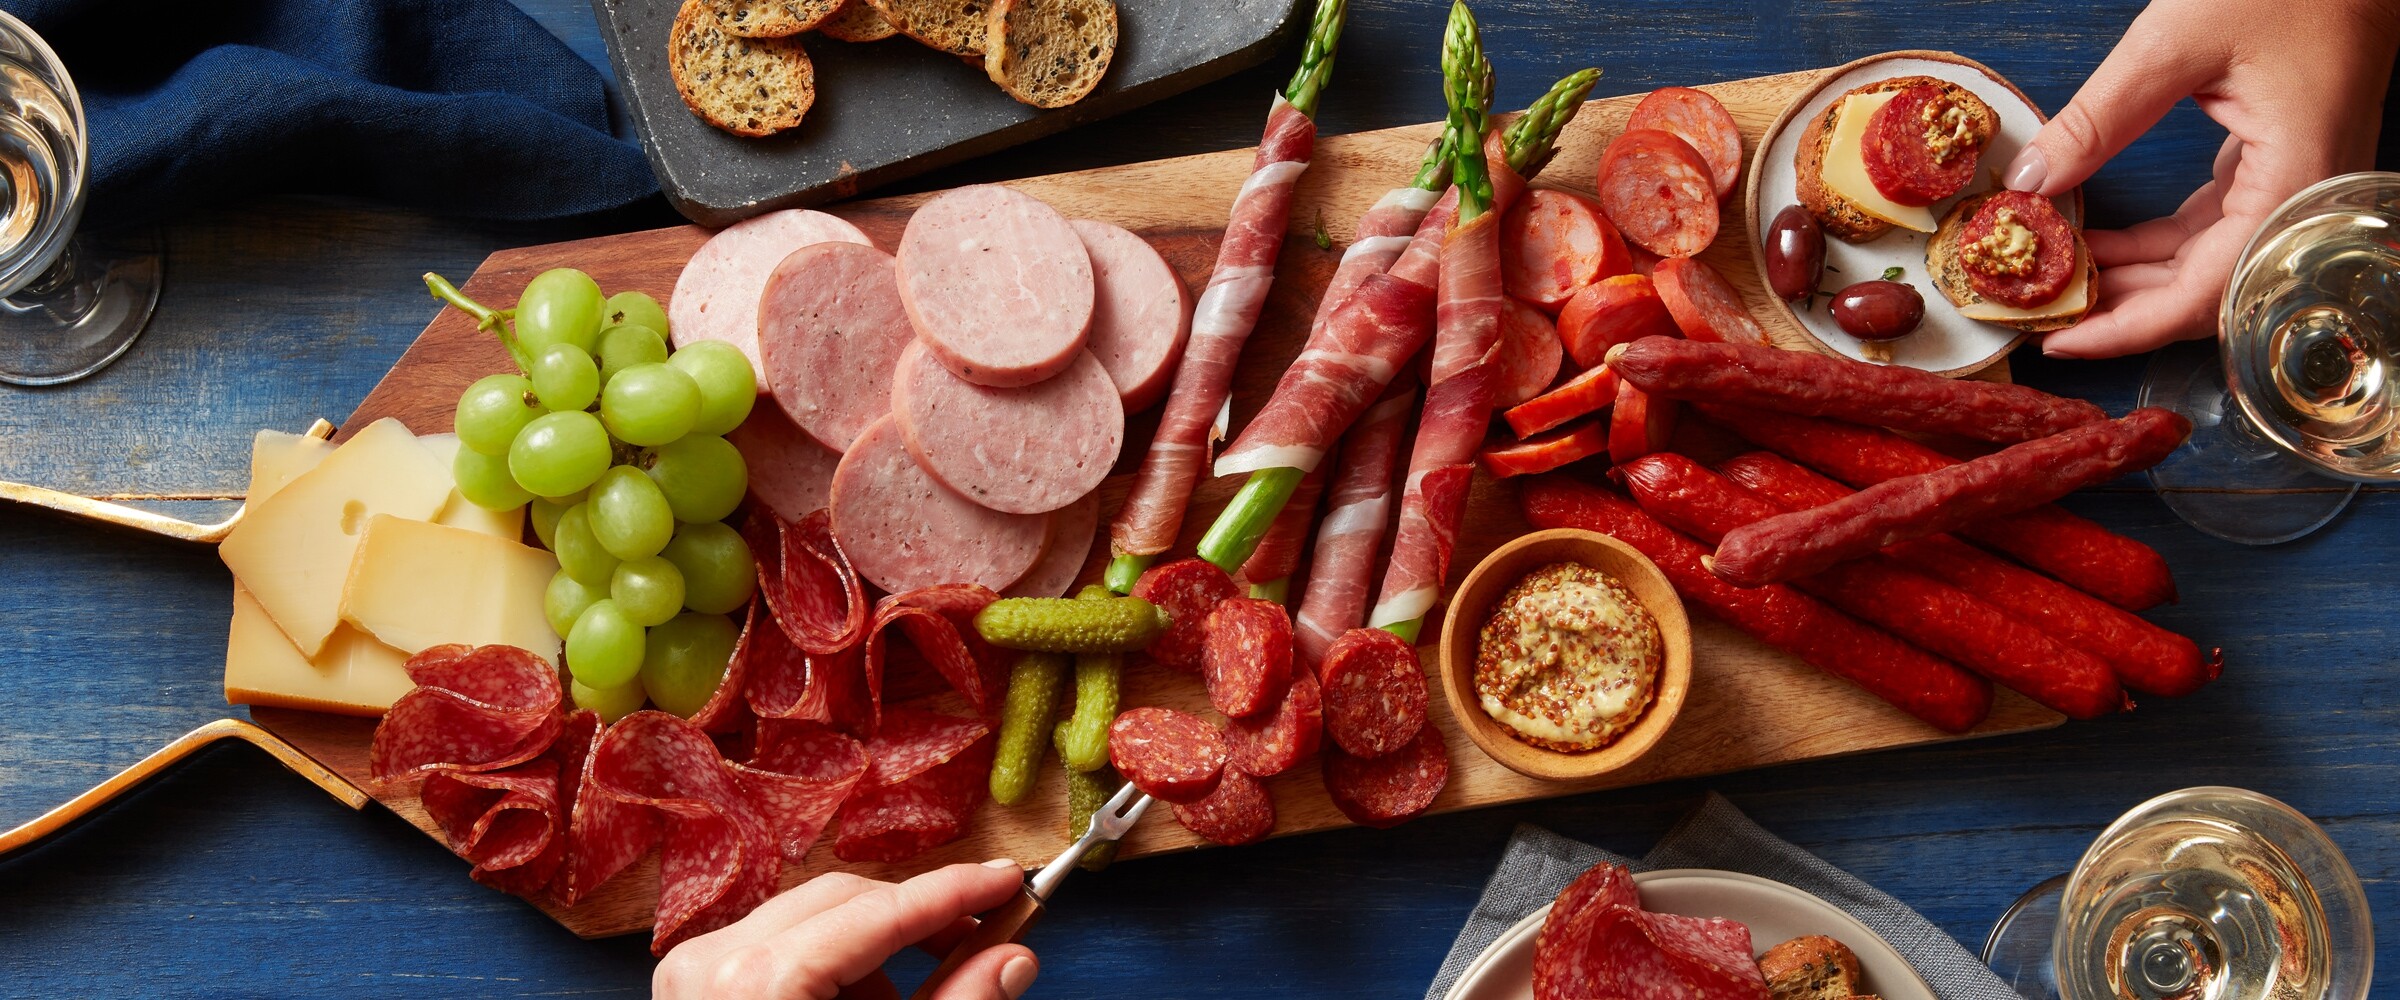 Charcuterie board covered with meat, cheese, crackers and spreads.